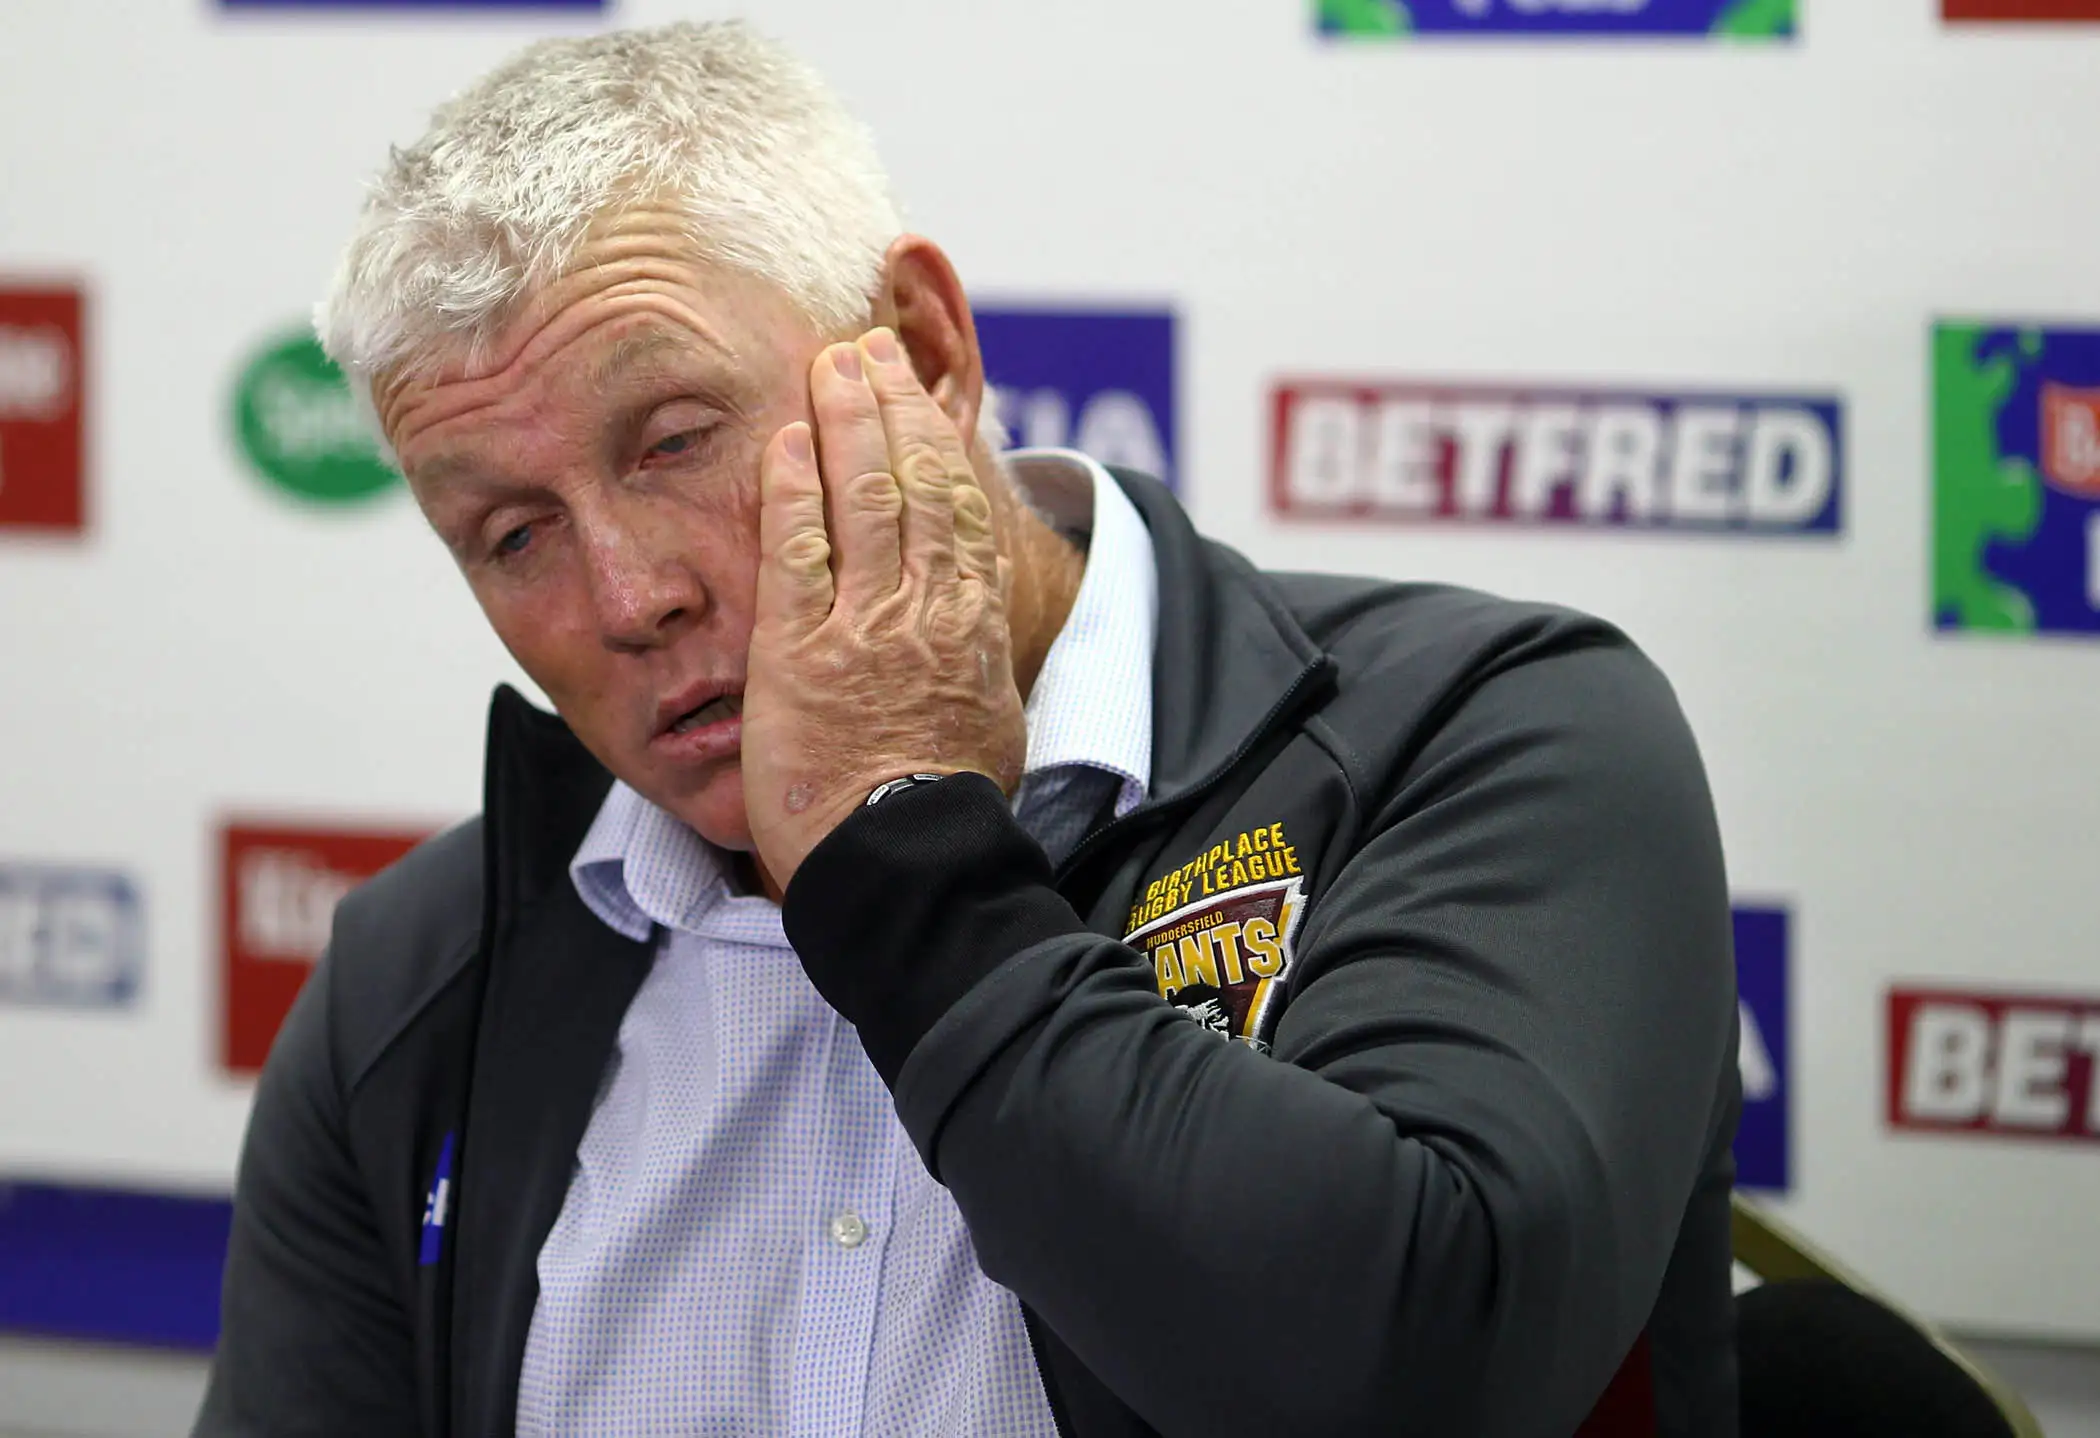 Huddersfield were outplayed by Hull KR, admits Rick Stone